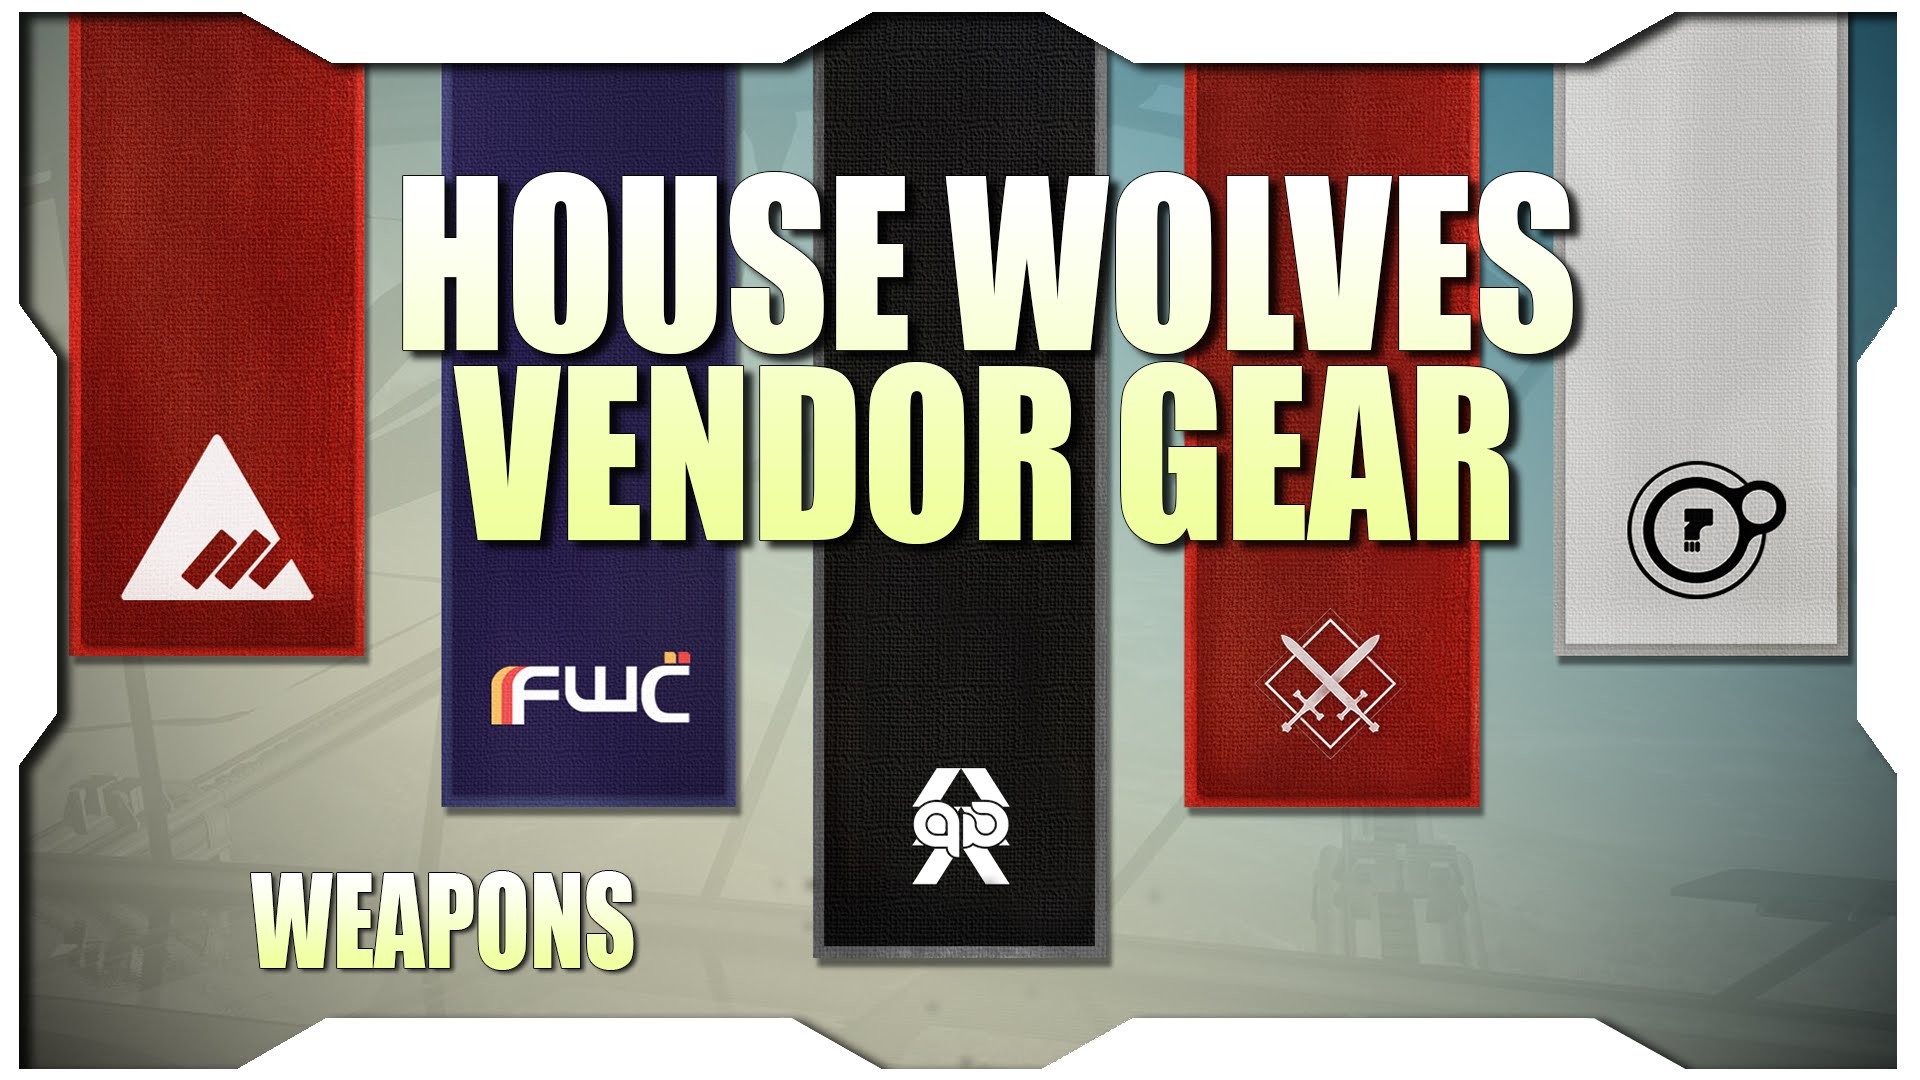 1920x1080 Destiny House of Wolves "New" Vendor Weapons! Dead Orbit, New Monarchy,  Crucible, and FWC!